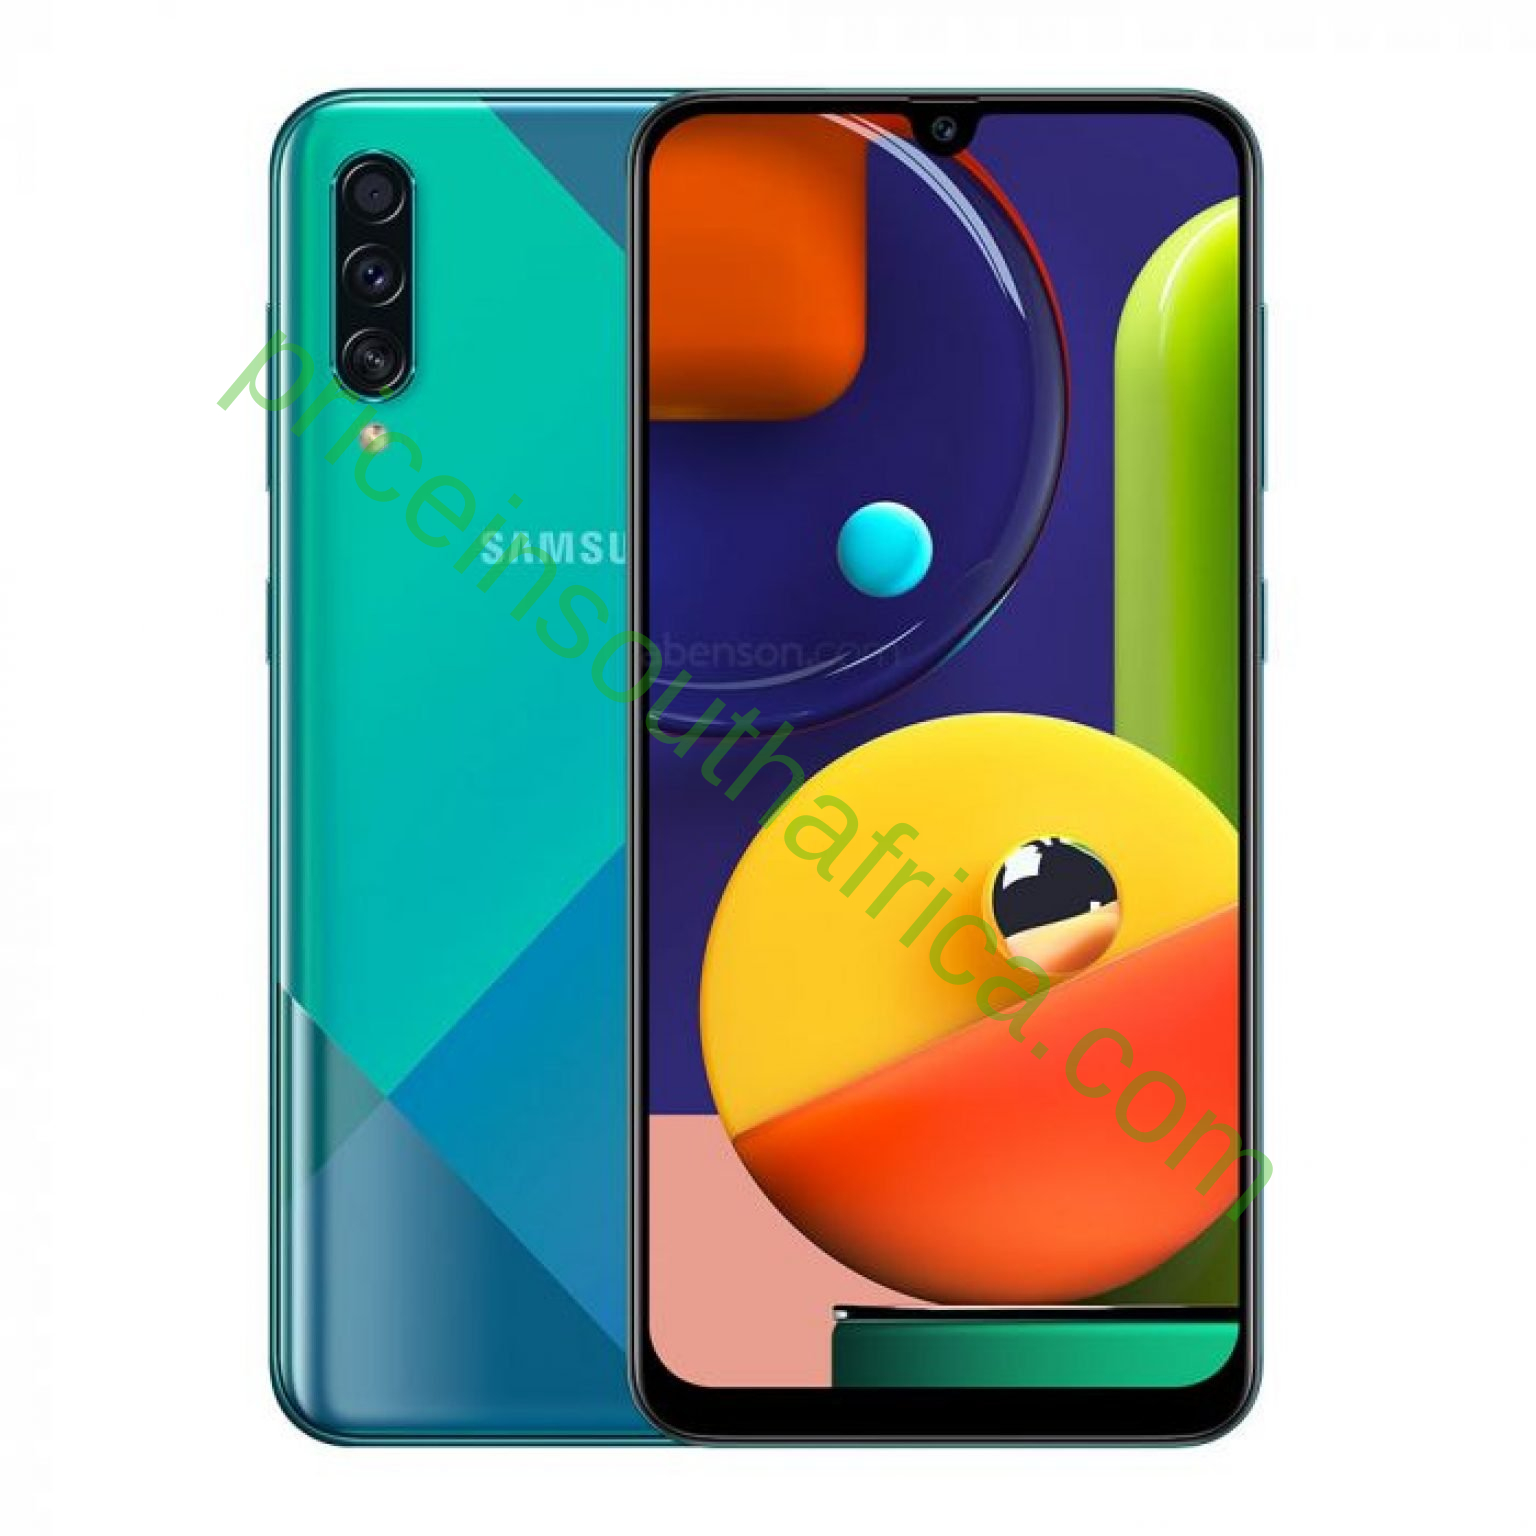 Samsung Galaxy A50s price in South Africa